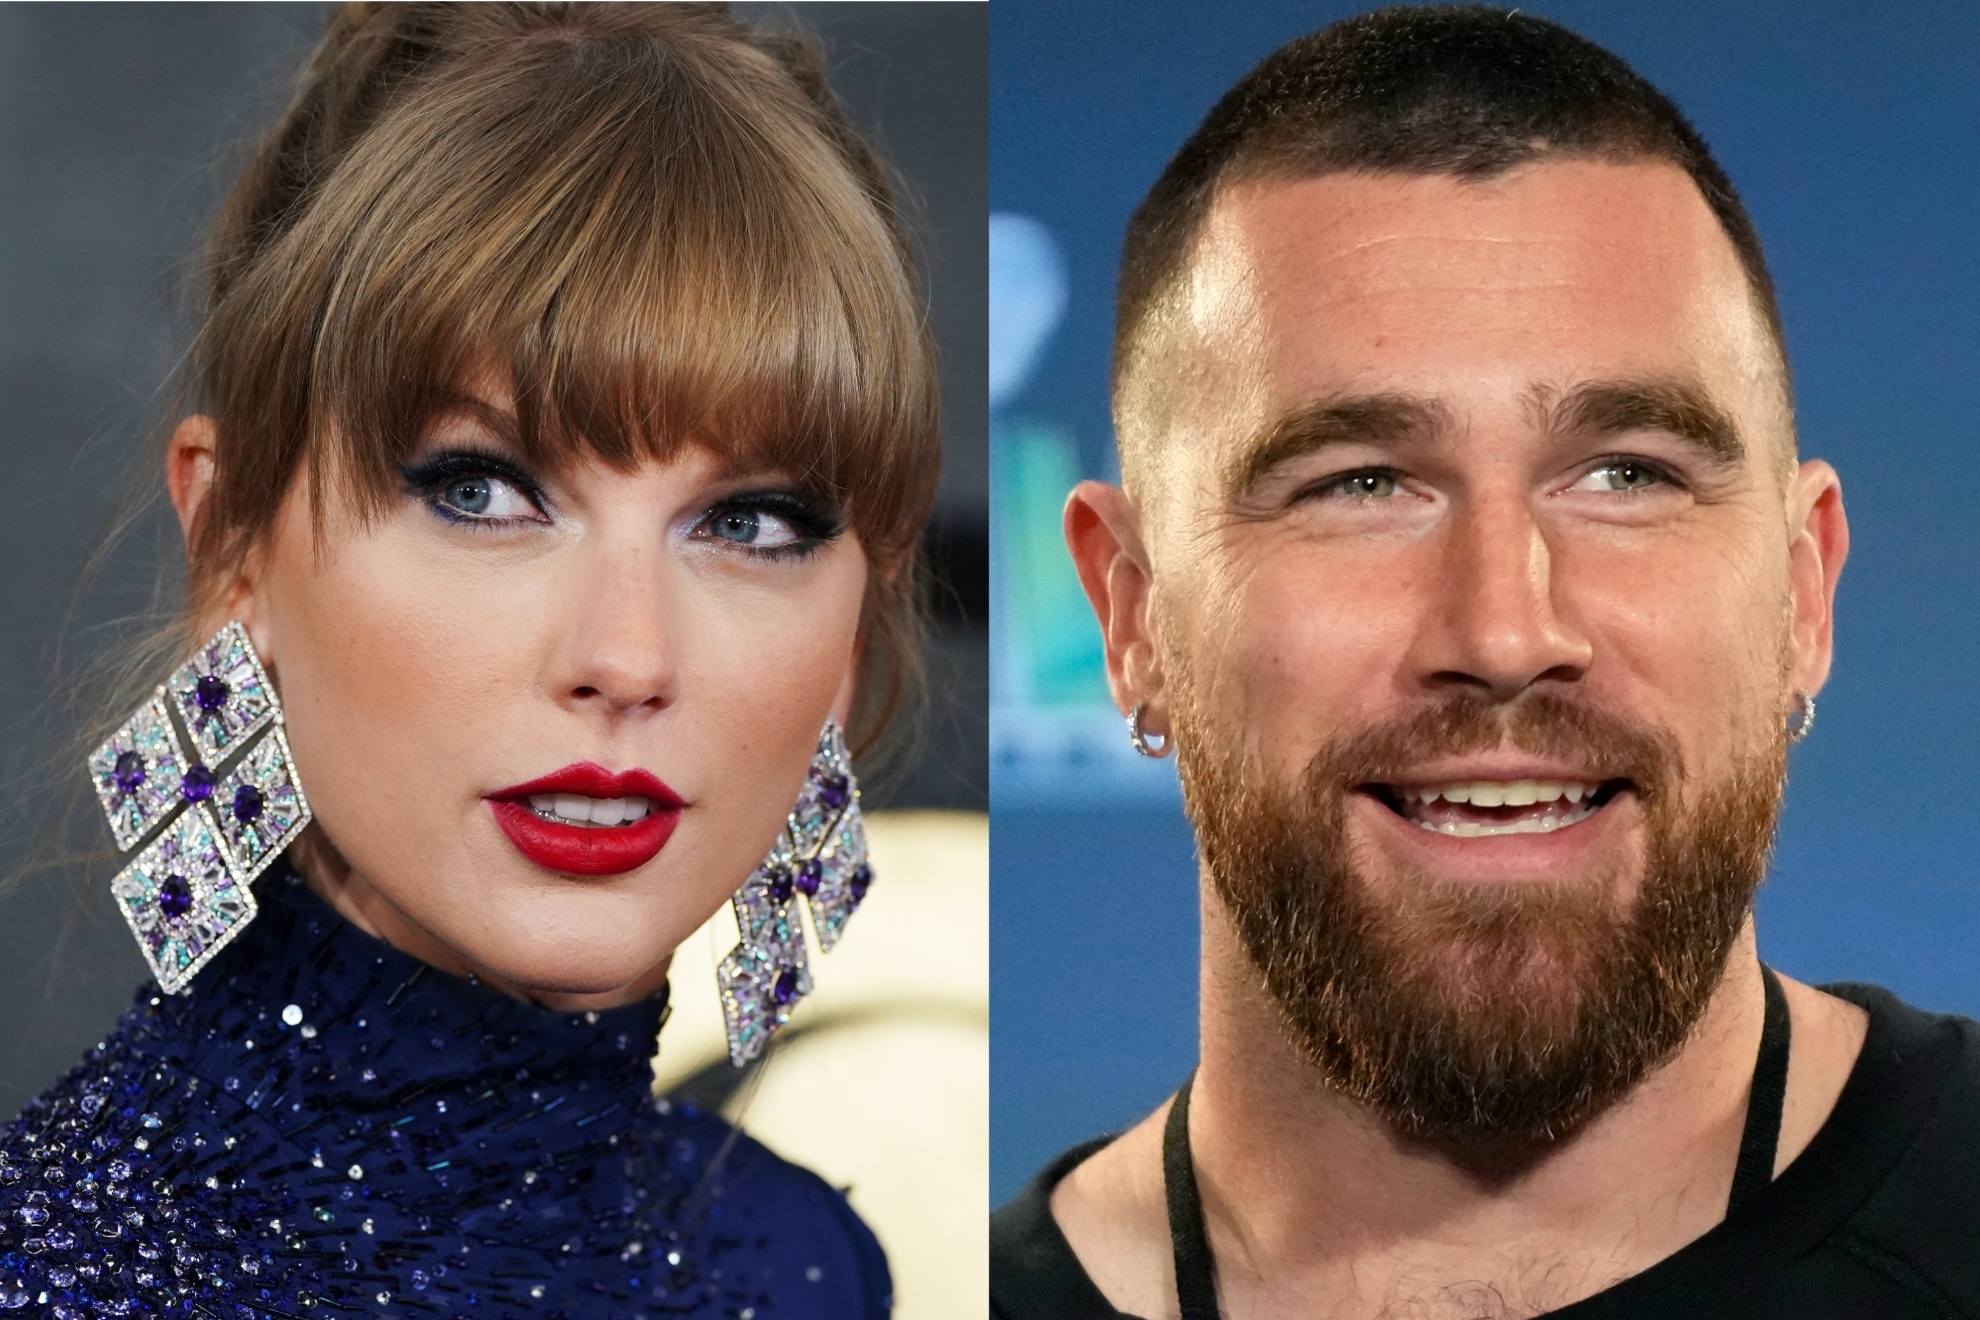 Pop star Taylor Swift and Chiefs' tight end Travis Kelce.